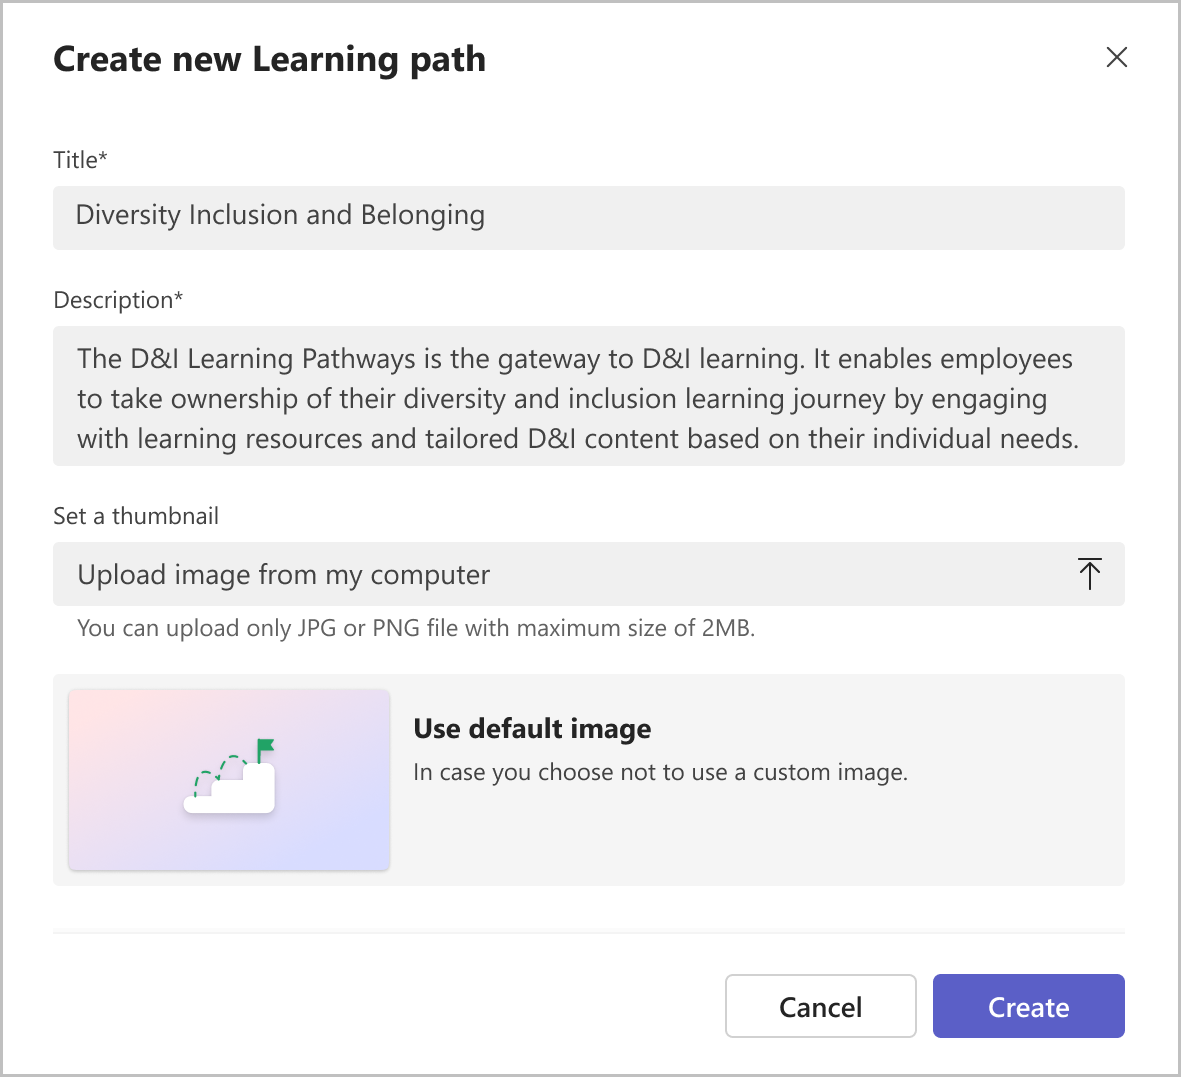 Image of create new Learning path description fields.